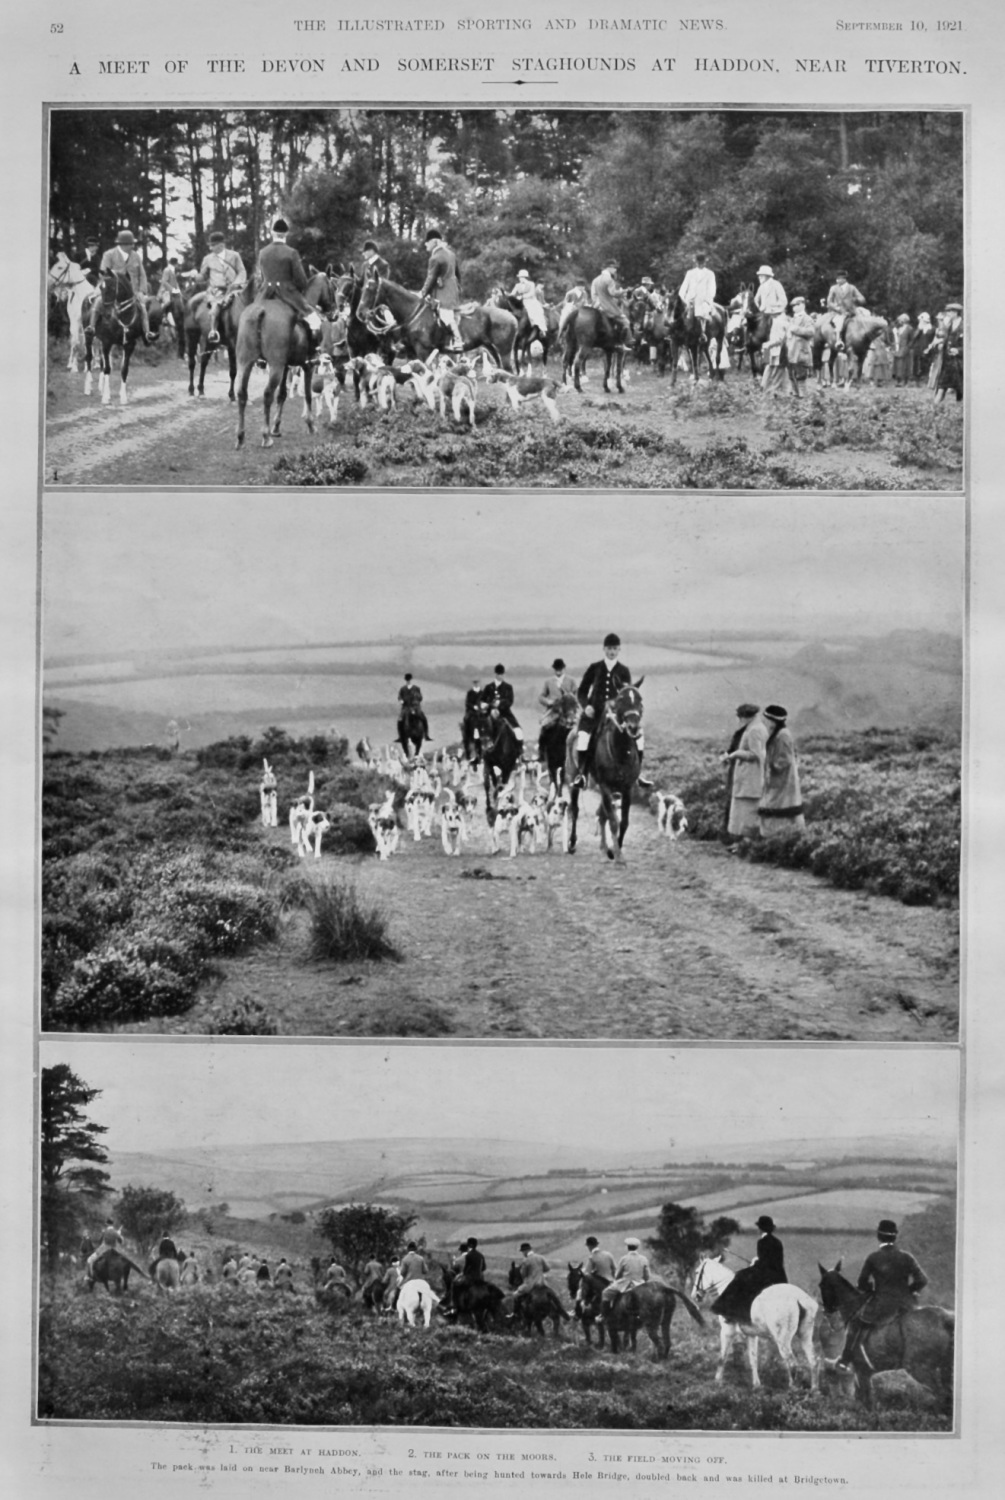 A Meet of the Devon and Somerset Staghounds at Haddon, near Tiverton.  1921